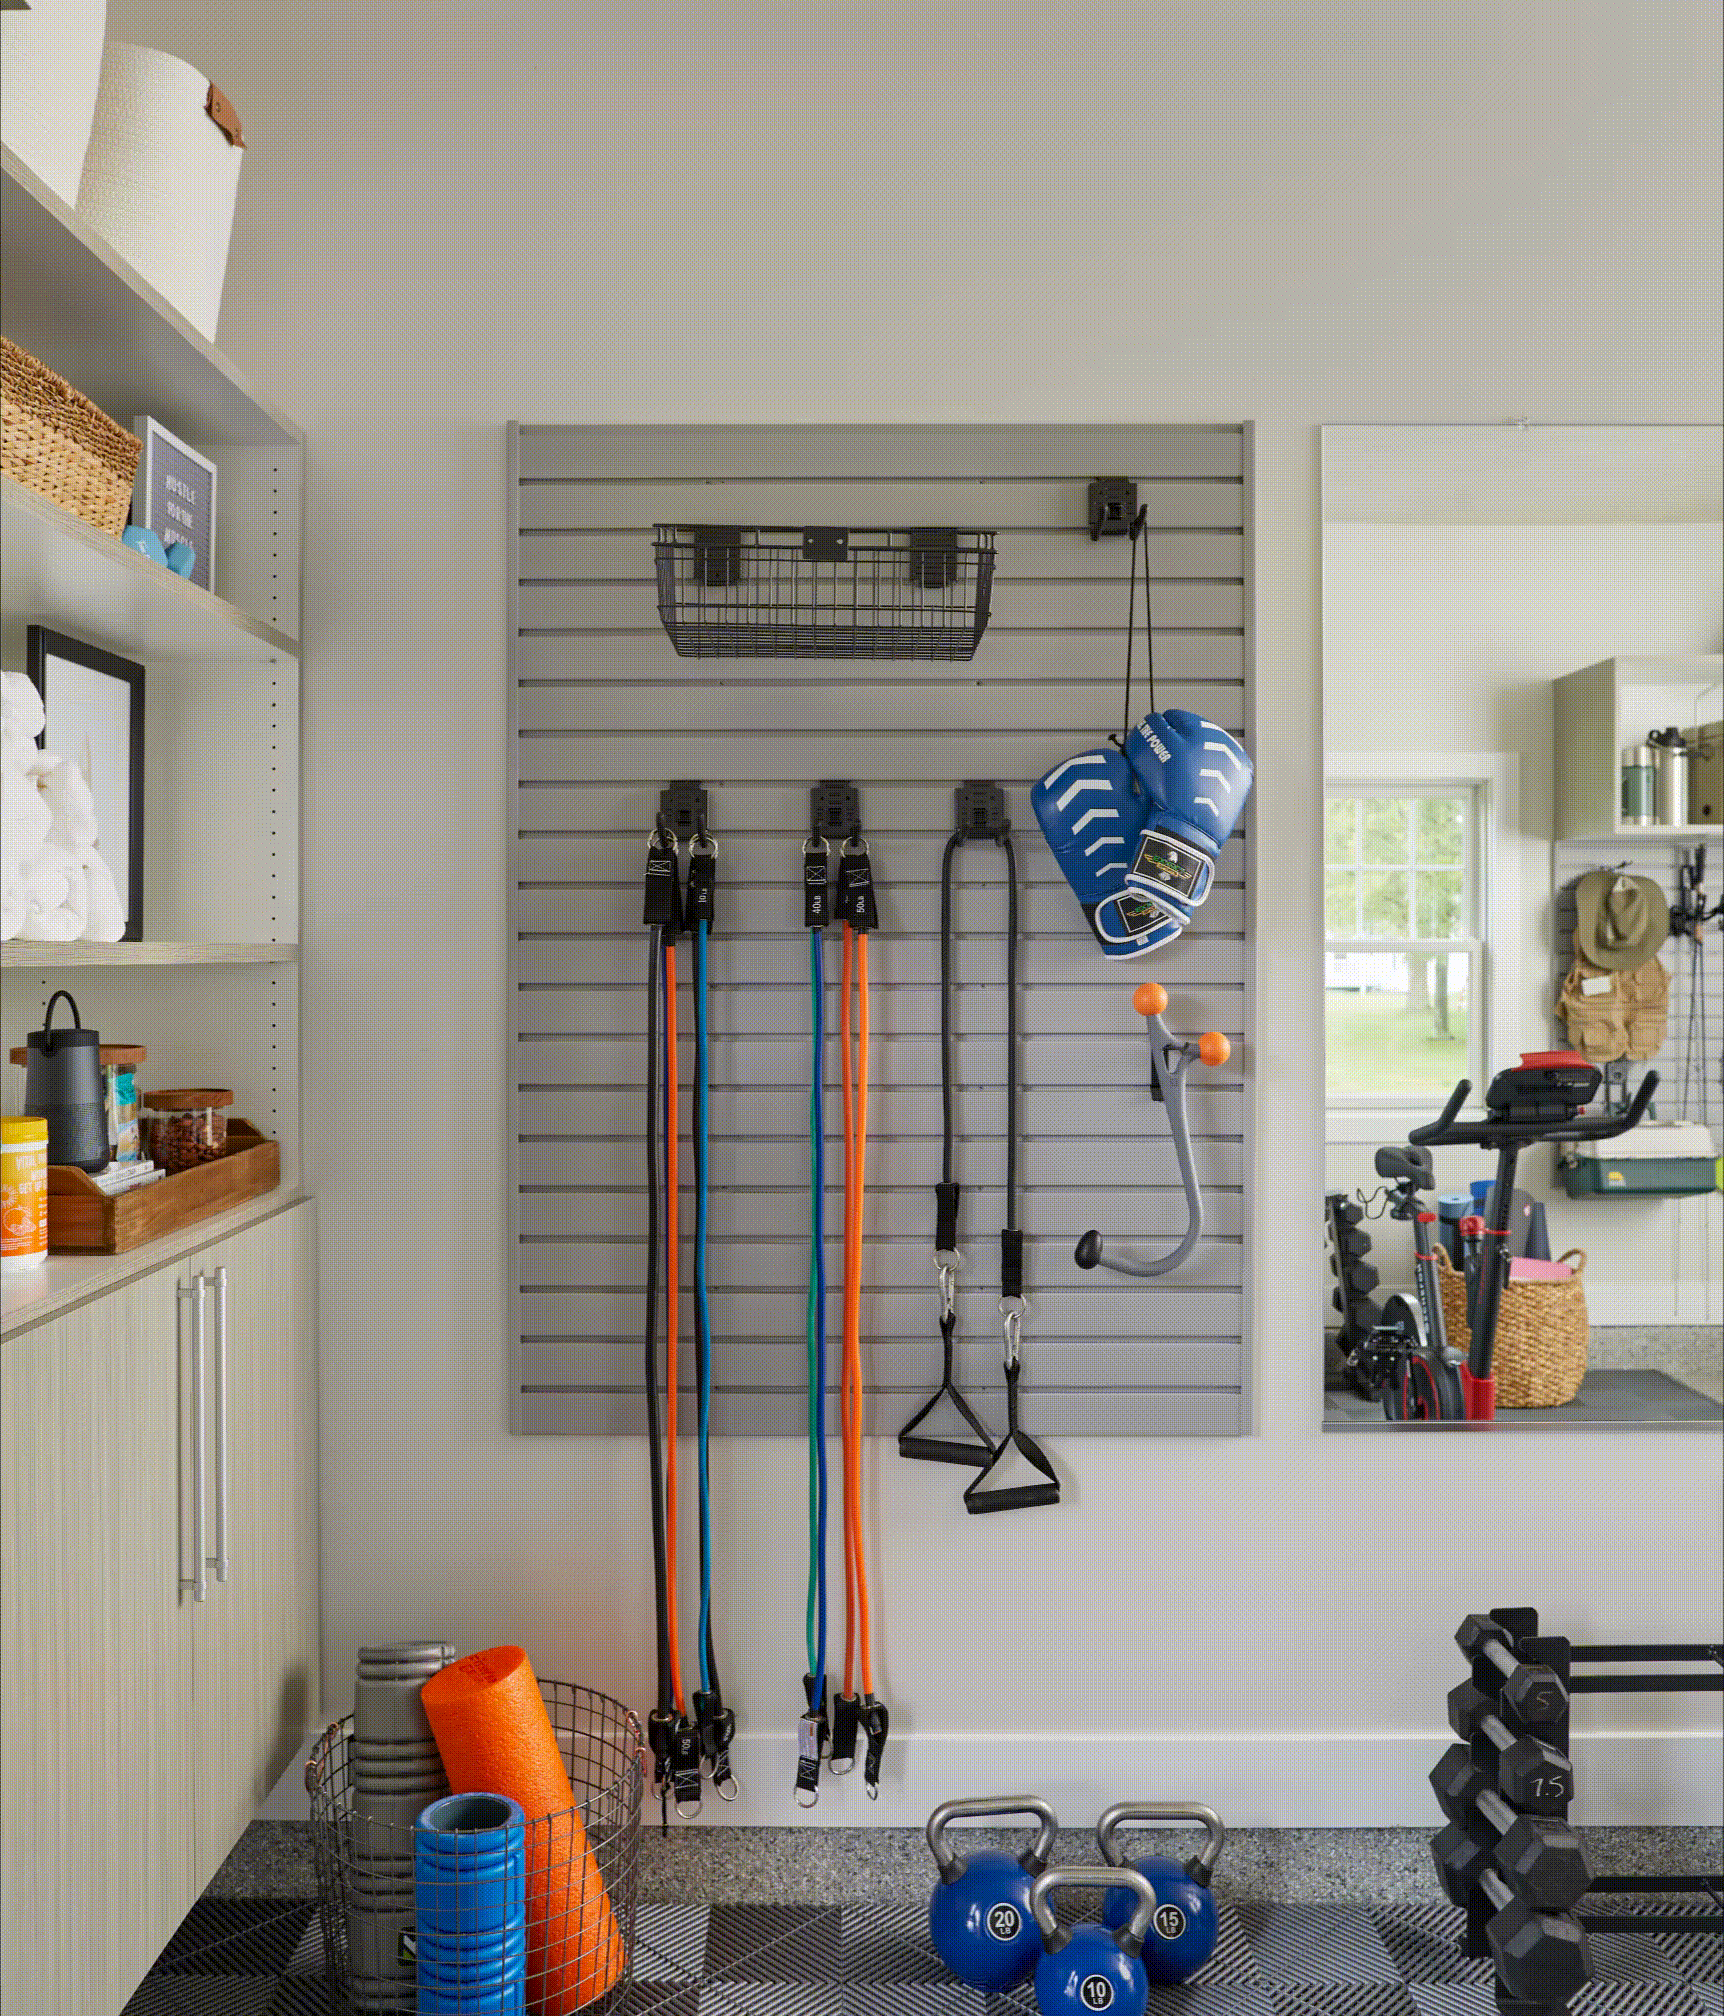 Slatwall storage for sports equipment for a garage